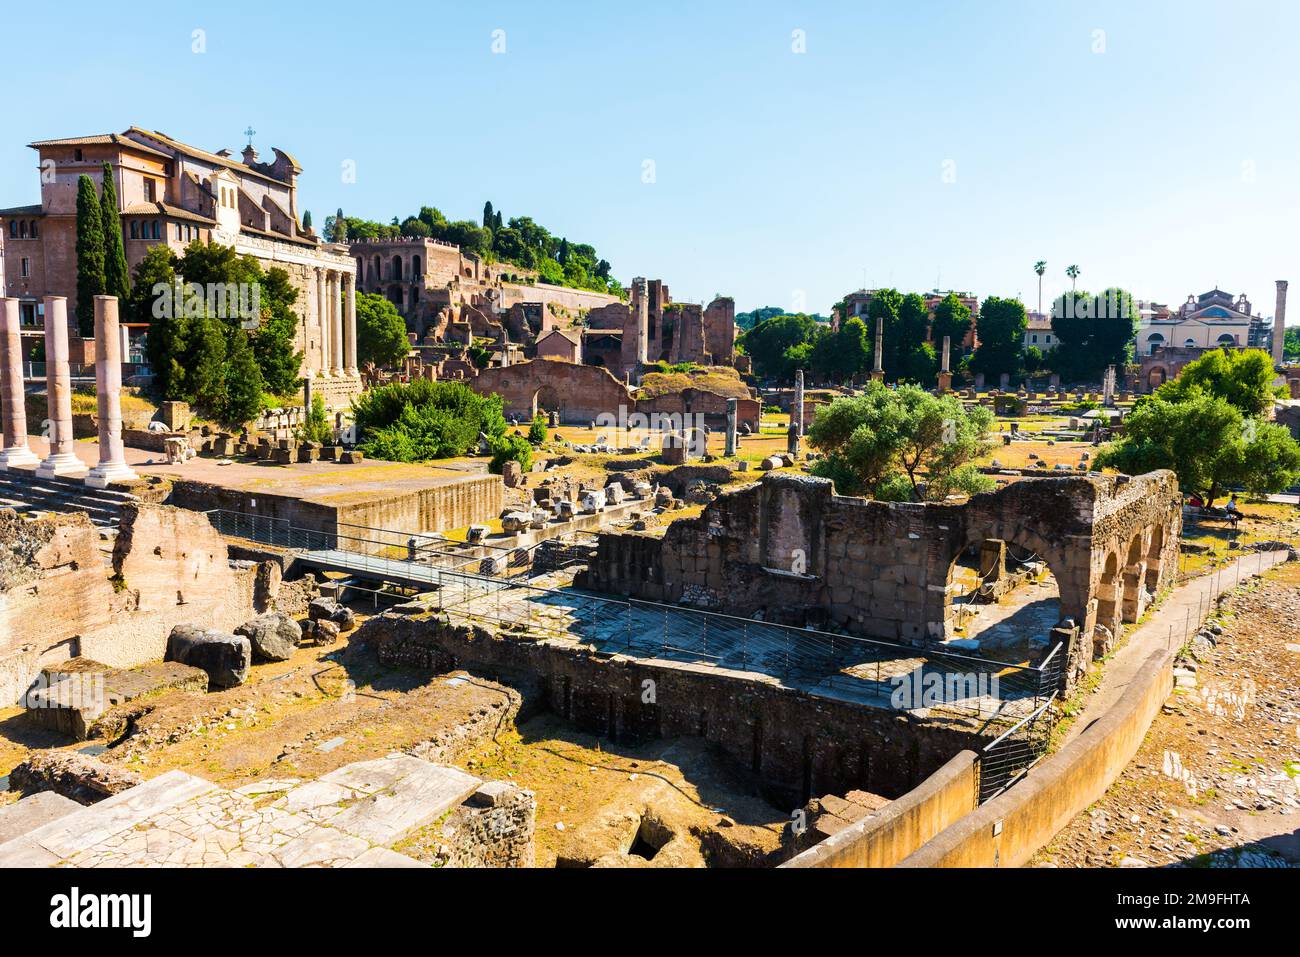 The ancient Roman Forum in Rome, Italy. Roman Forum was ancient Rome's showpiece centre and a grandiose district of temples. Stock Photo